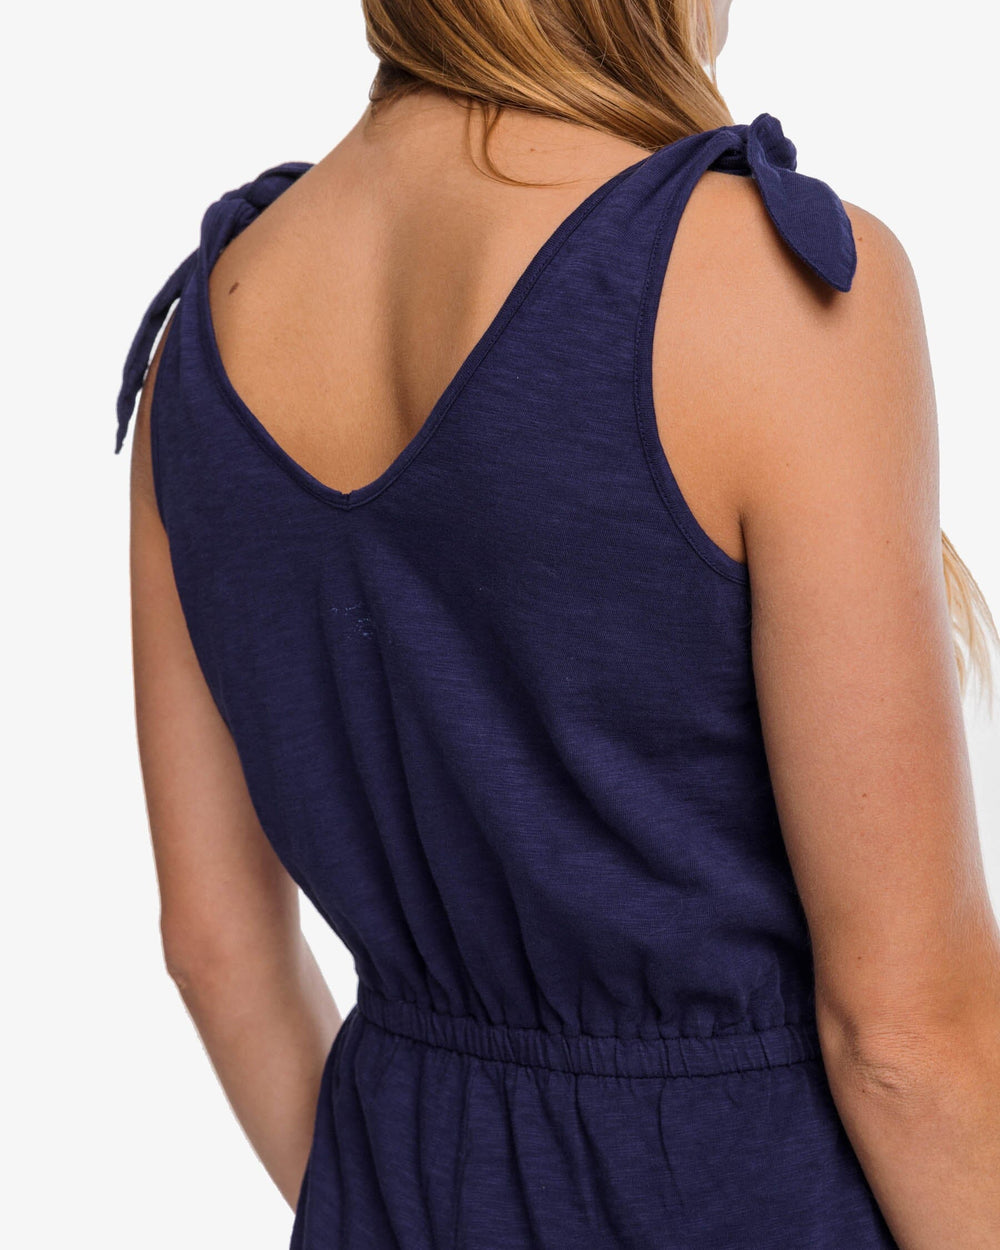 The back detail view of the Southern Tide Tillie Sun Farer Tie Shoulder Romper by Southern Tide - Nautical Navy